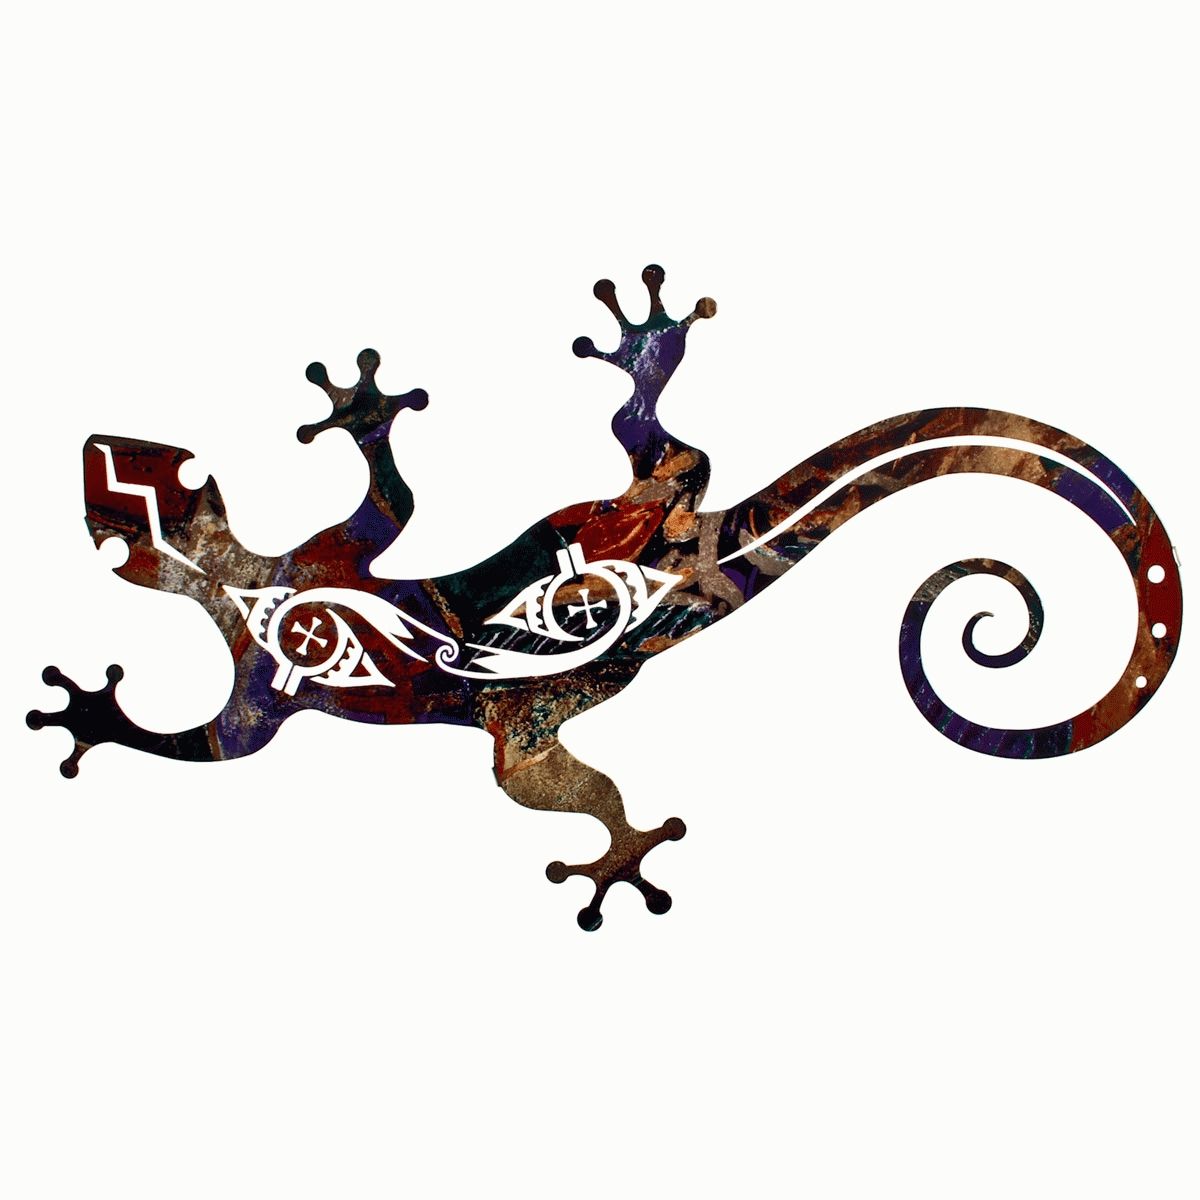 Tribal Gecko Metal Wall Art – 20 Inch In Best And Newest Gecko Metal Wall Art (View 6 of 20)